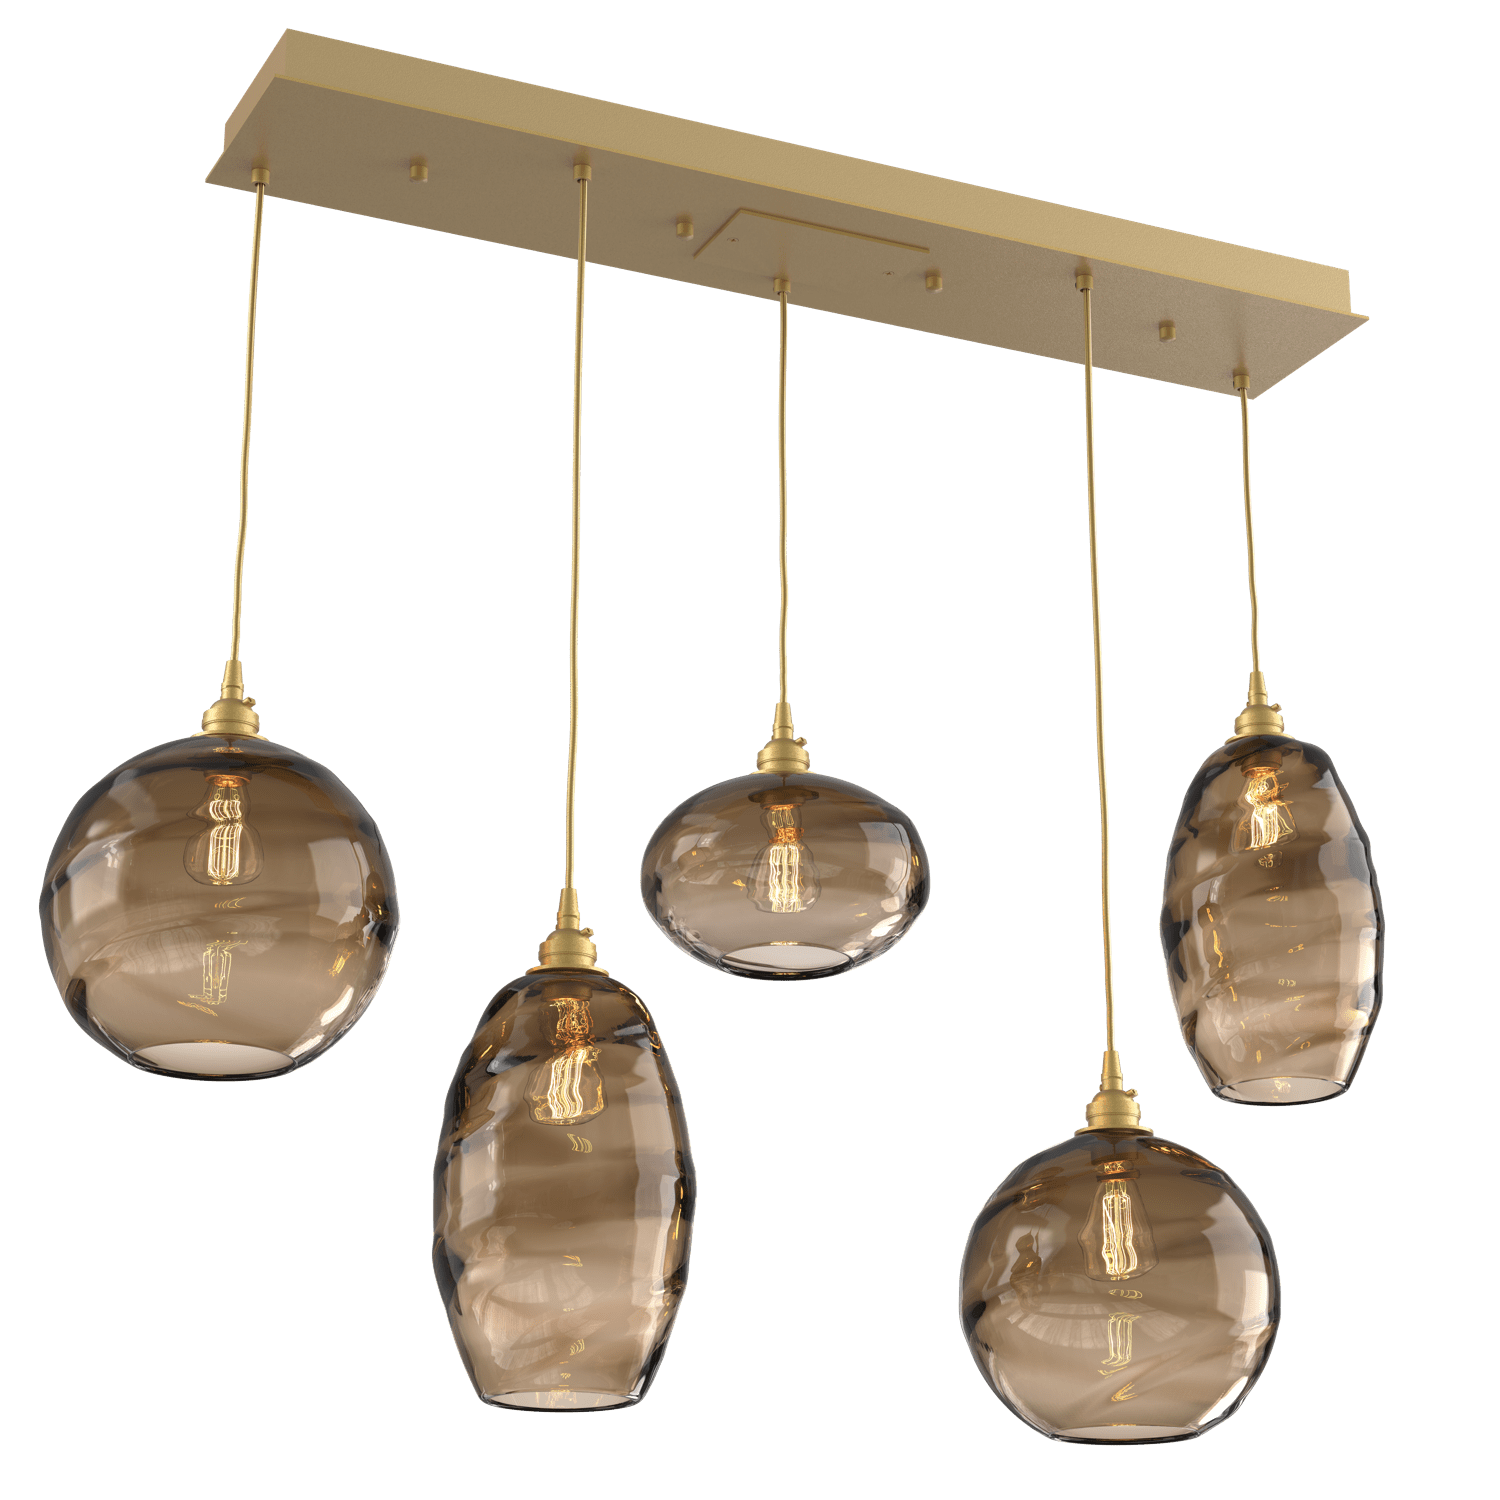 PLB0048-05-GB-OB-Hammerton-Studio-Optic-Blown-Glass-Misto-5-light-linear-pendant-chandelier-with-gilded-brass-finish-and-optic-bronze-blown-glass-shades-and-incandescent-lamping